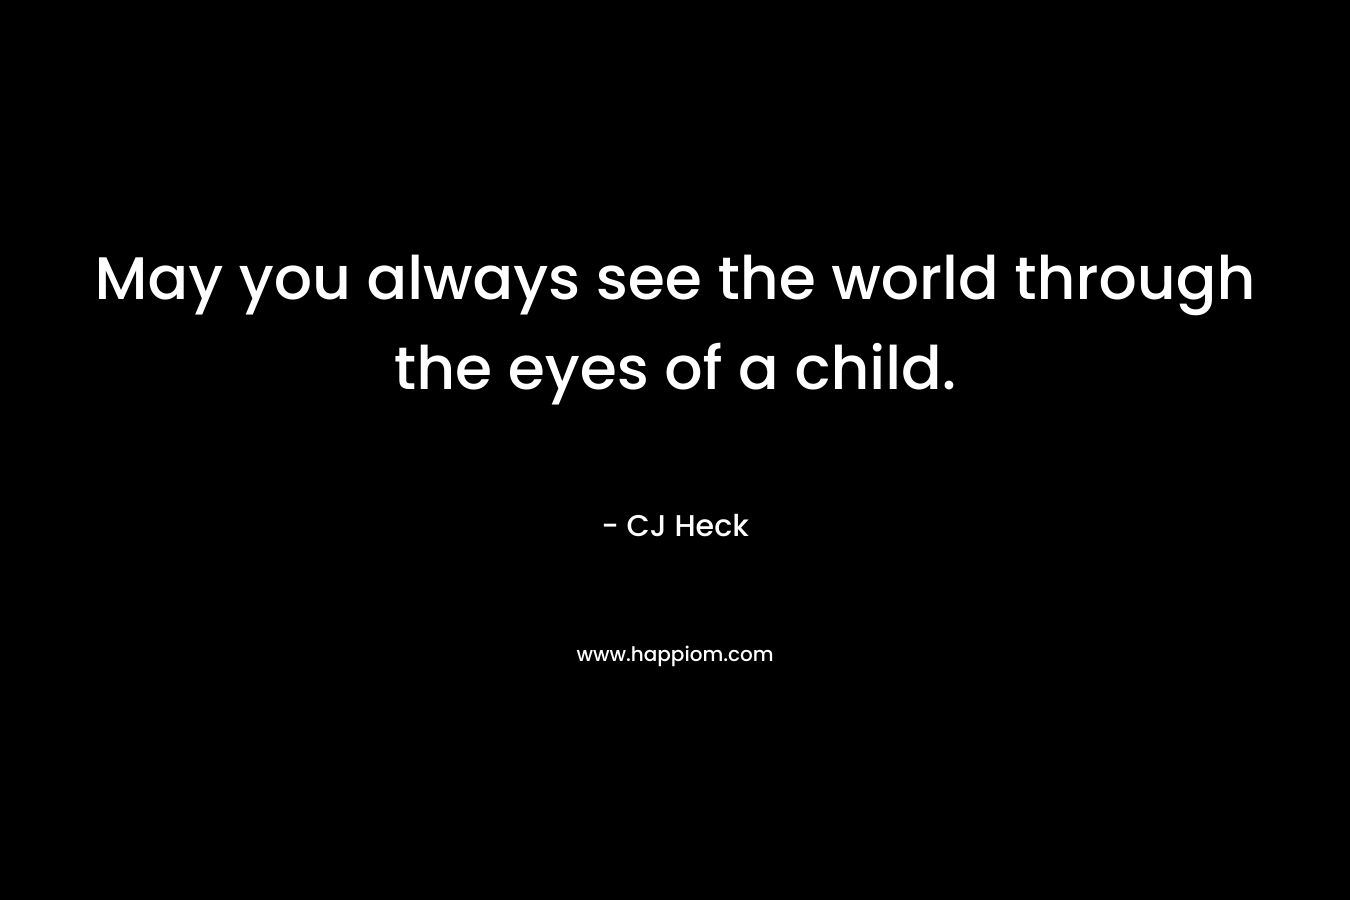 May you always see the world through the eyes of a child.